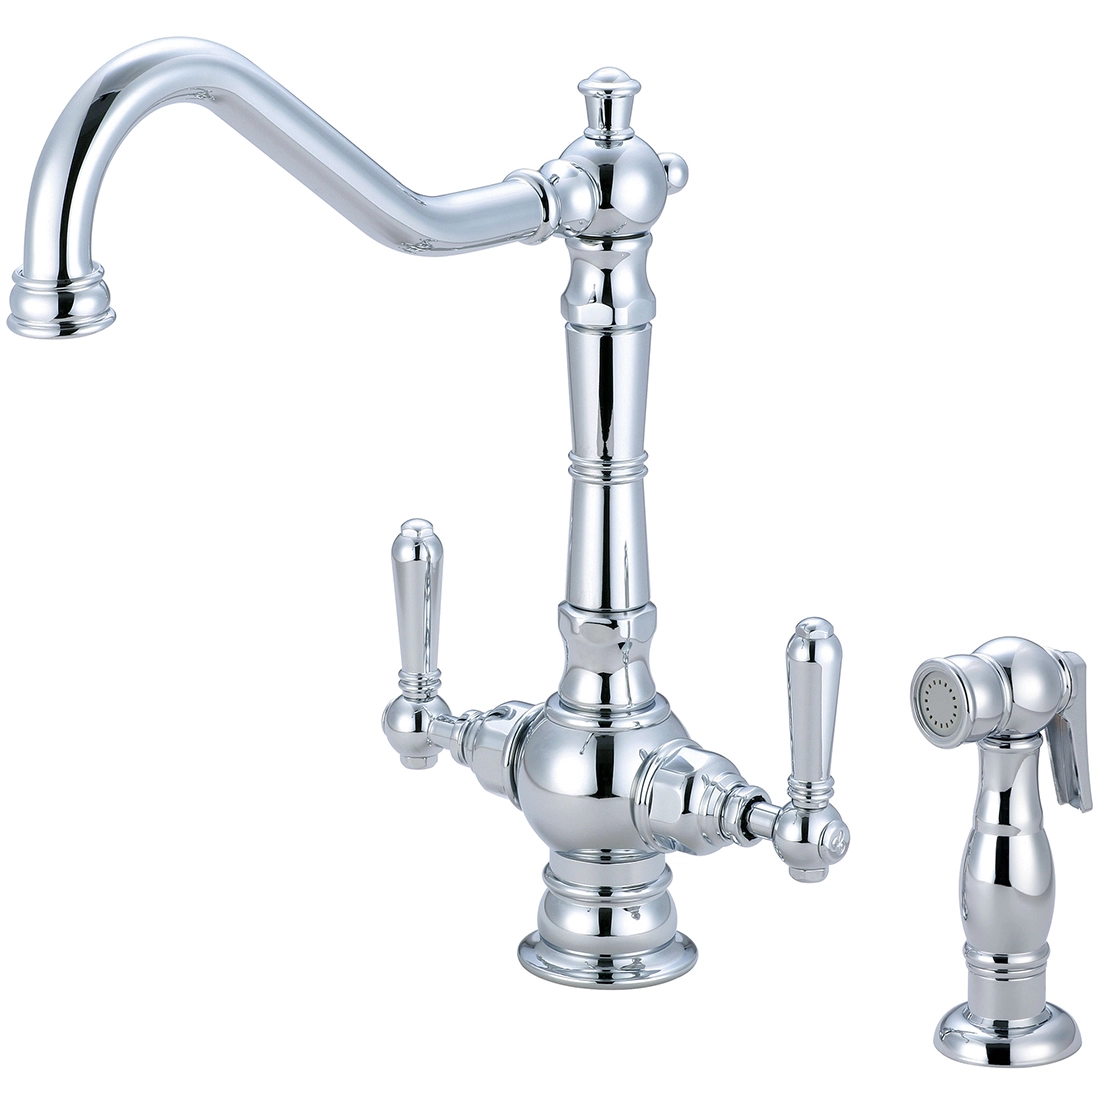 Americana Pioneer Two Handle Kitchen Faucet Model# 2AM401